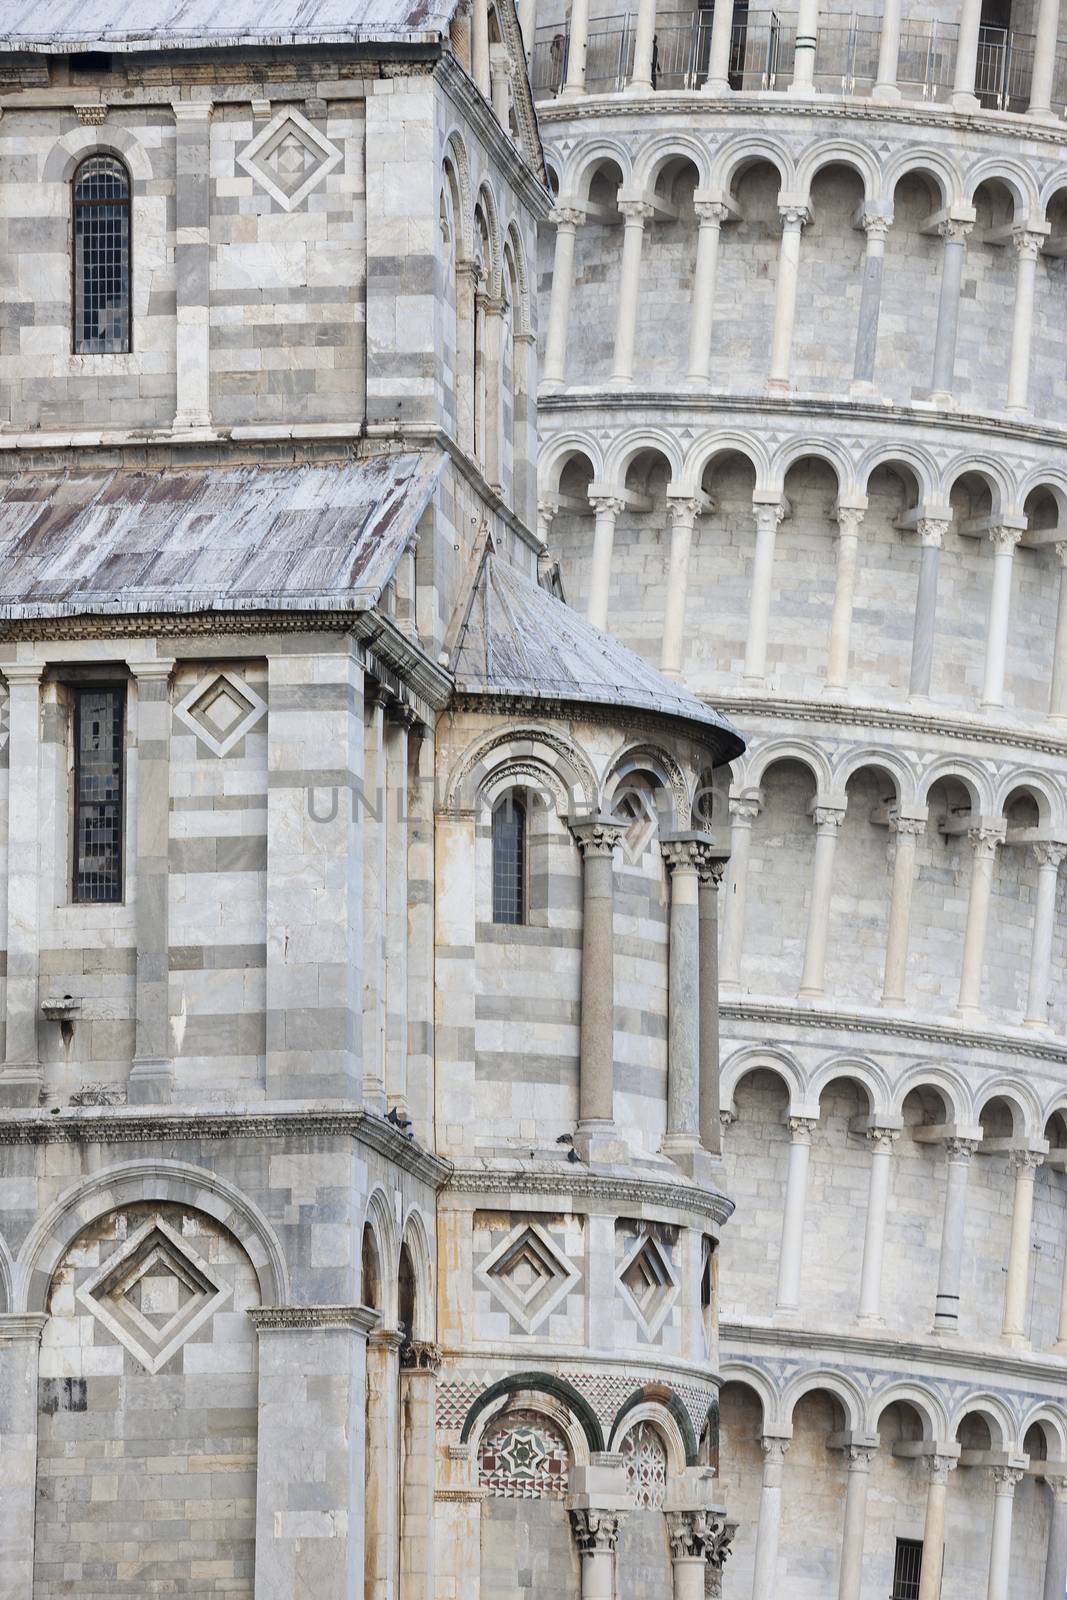 Pisa leaning tower by vwalakte